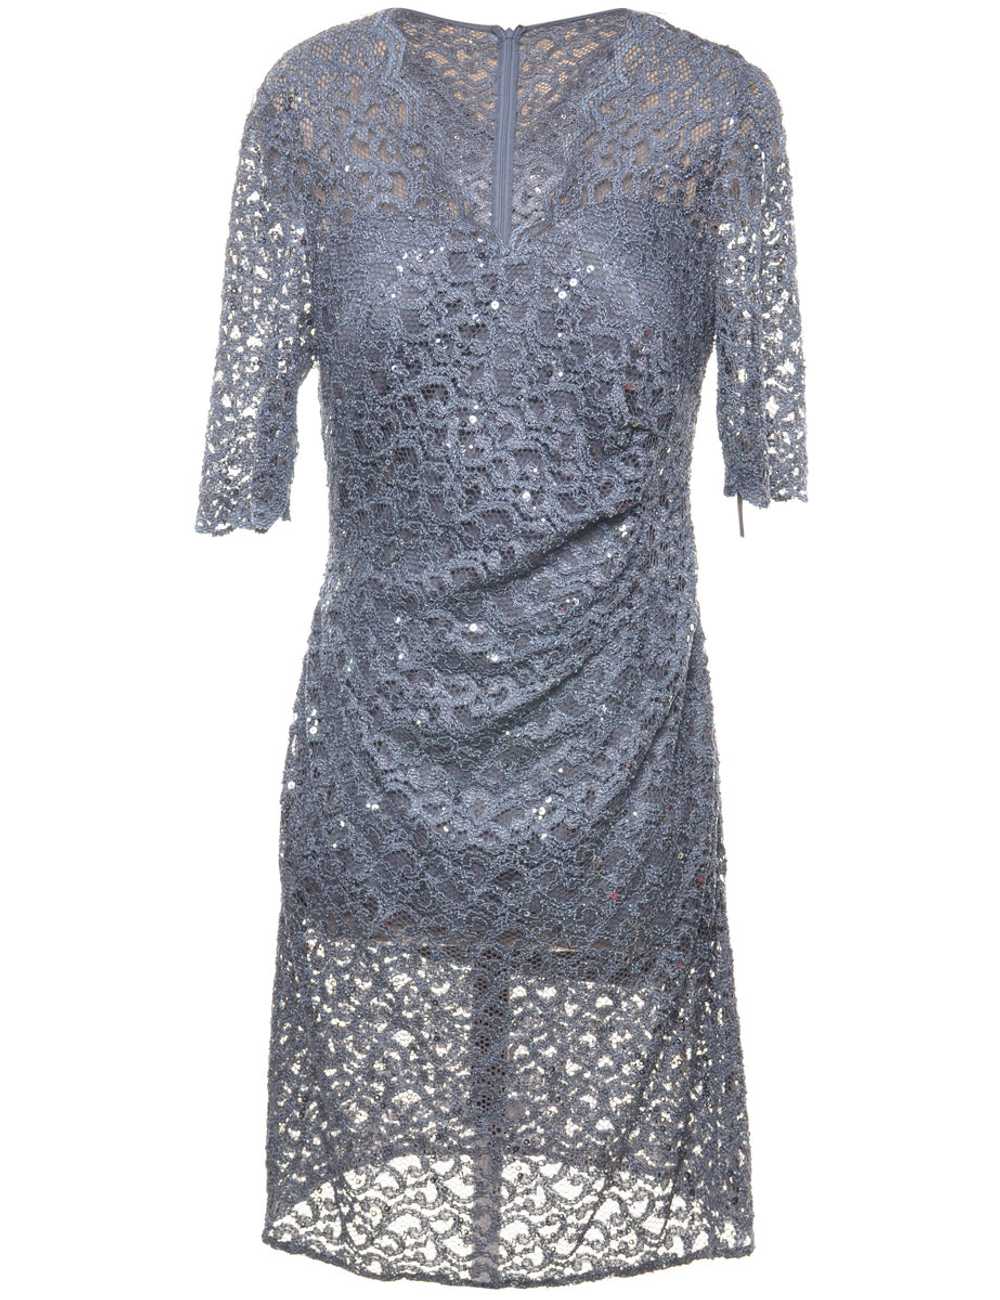 Sequined Evening Dress - M - image 1